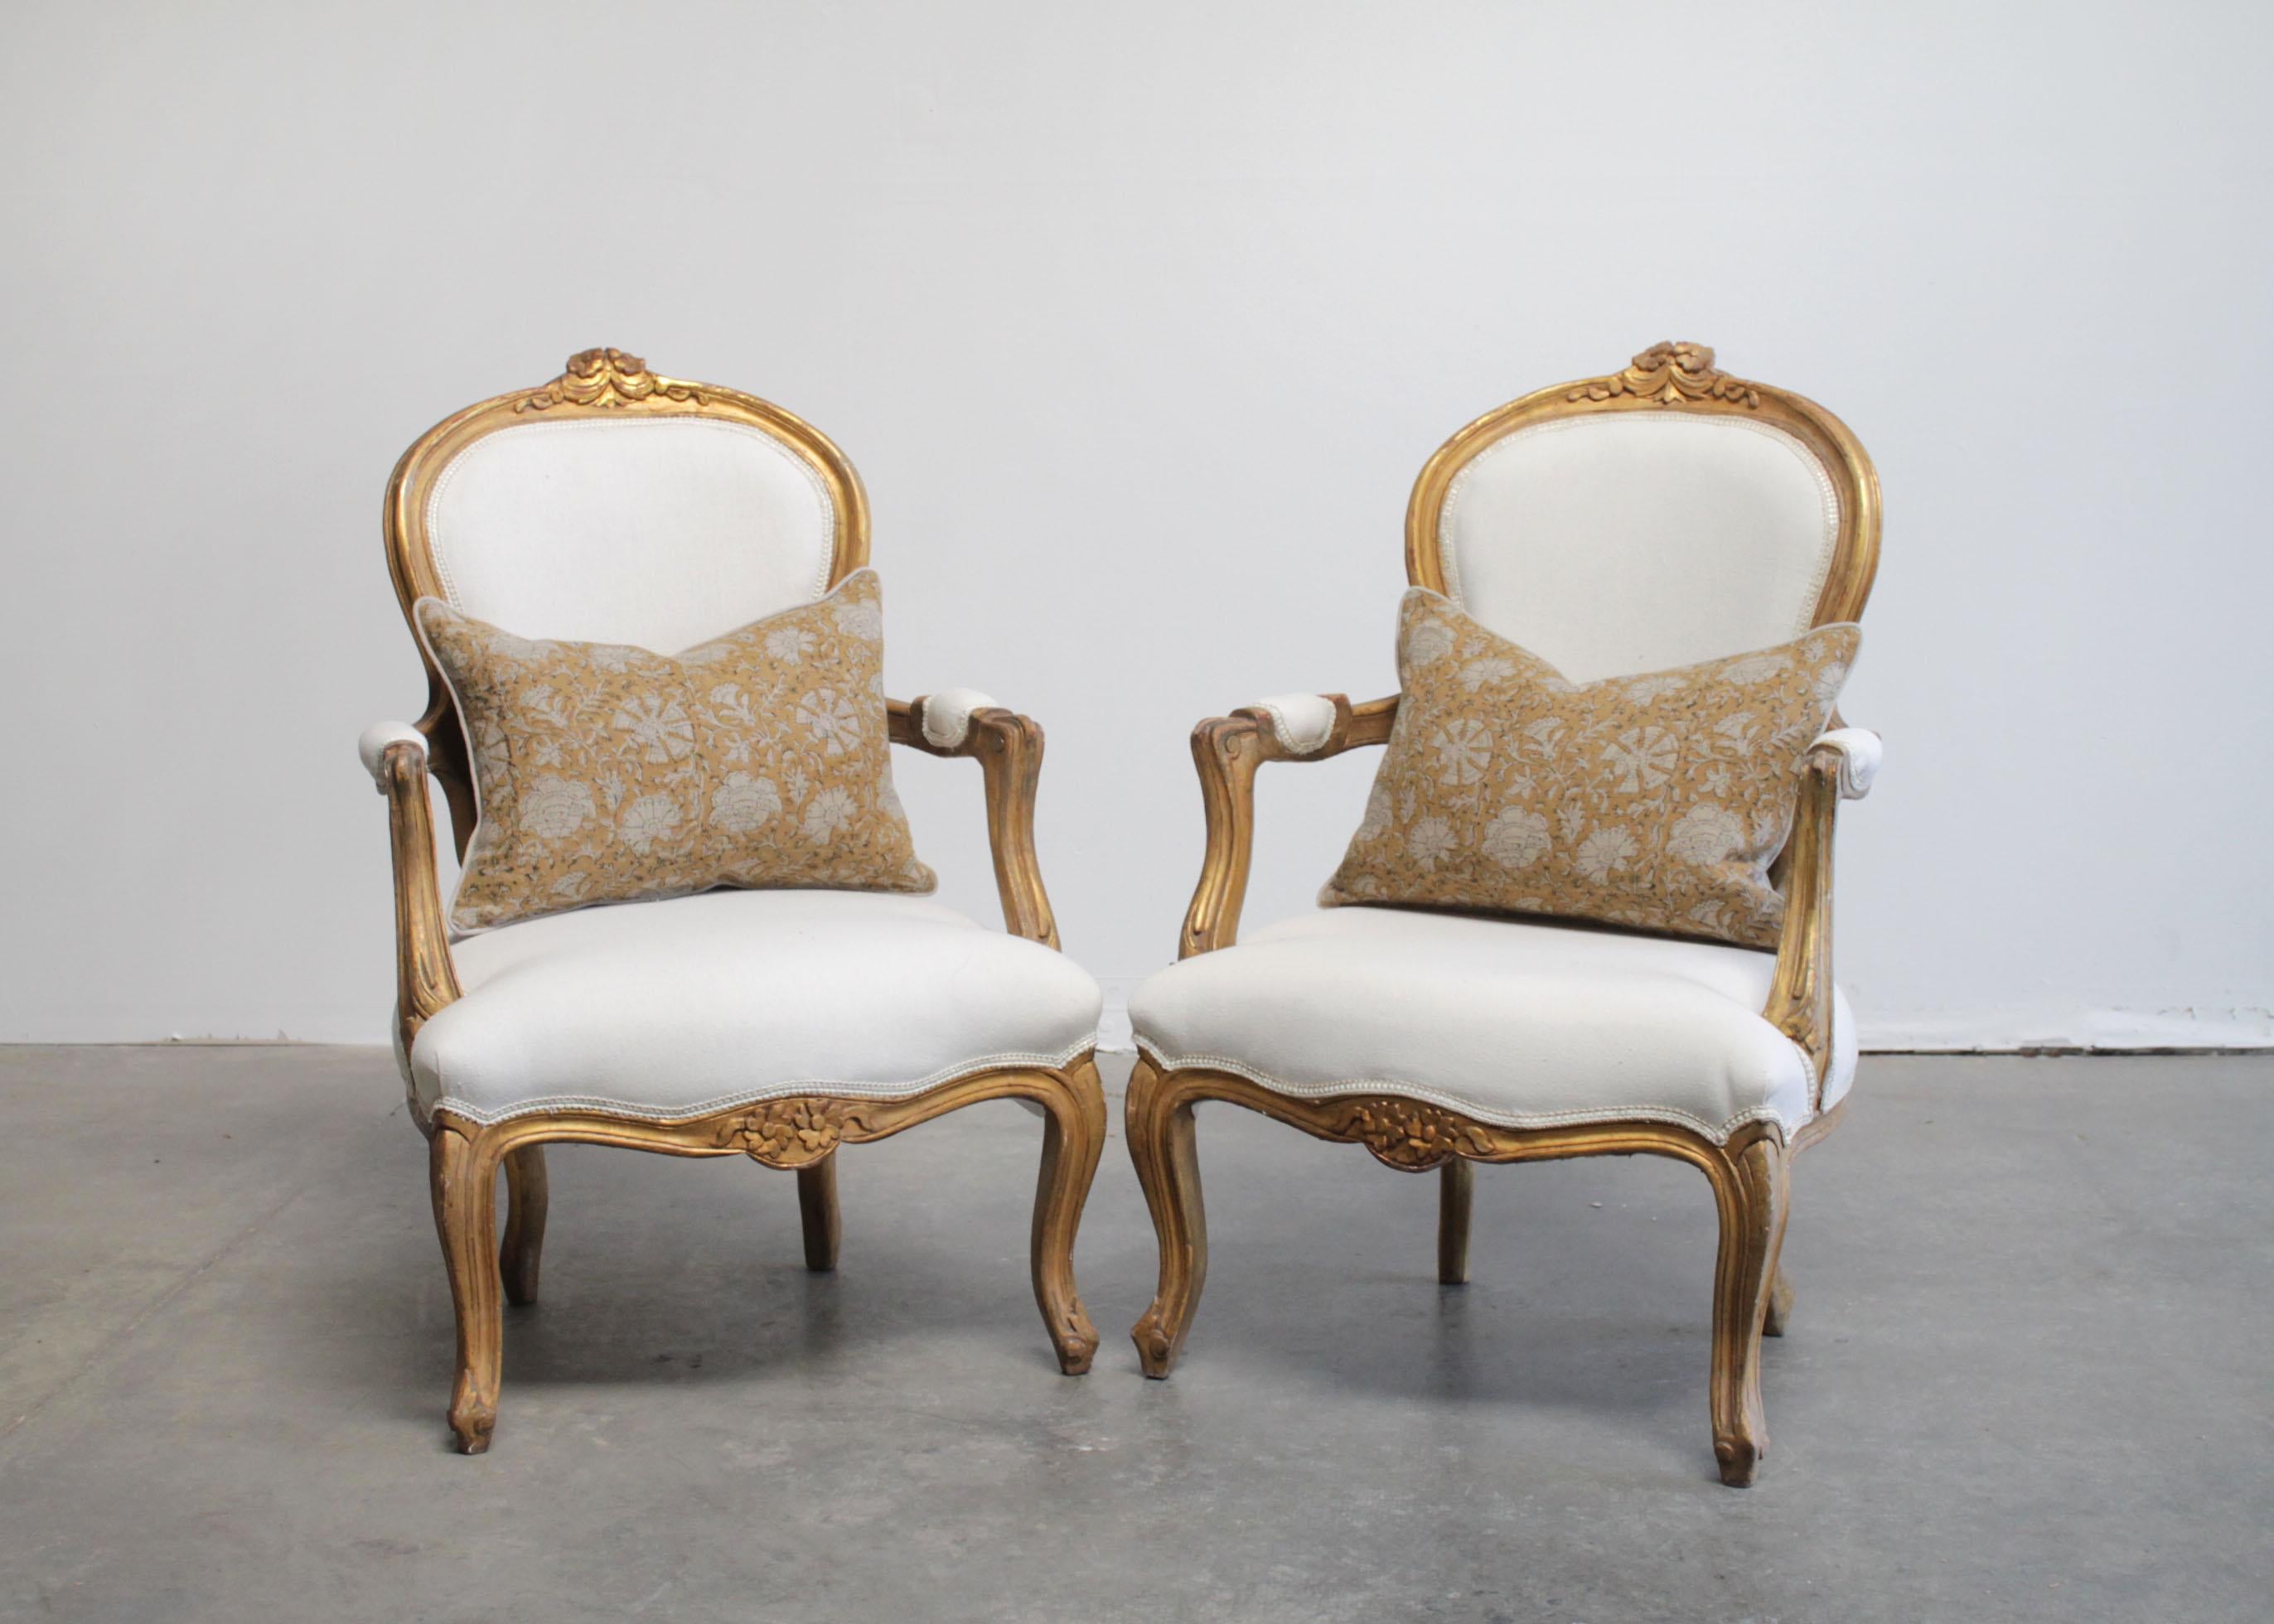 Antique Louis XV style giltwood carved open armchairs
Original giltwood finish with subtle distressed edges, and wood peeking through the gilt.
Classic cabriole legs, with flower carvings atop the center back, and floral carved apron at the seat.